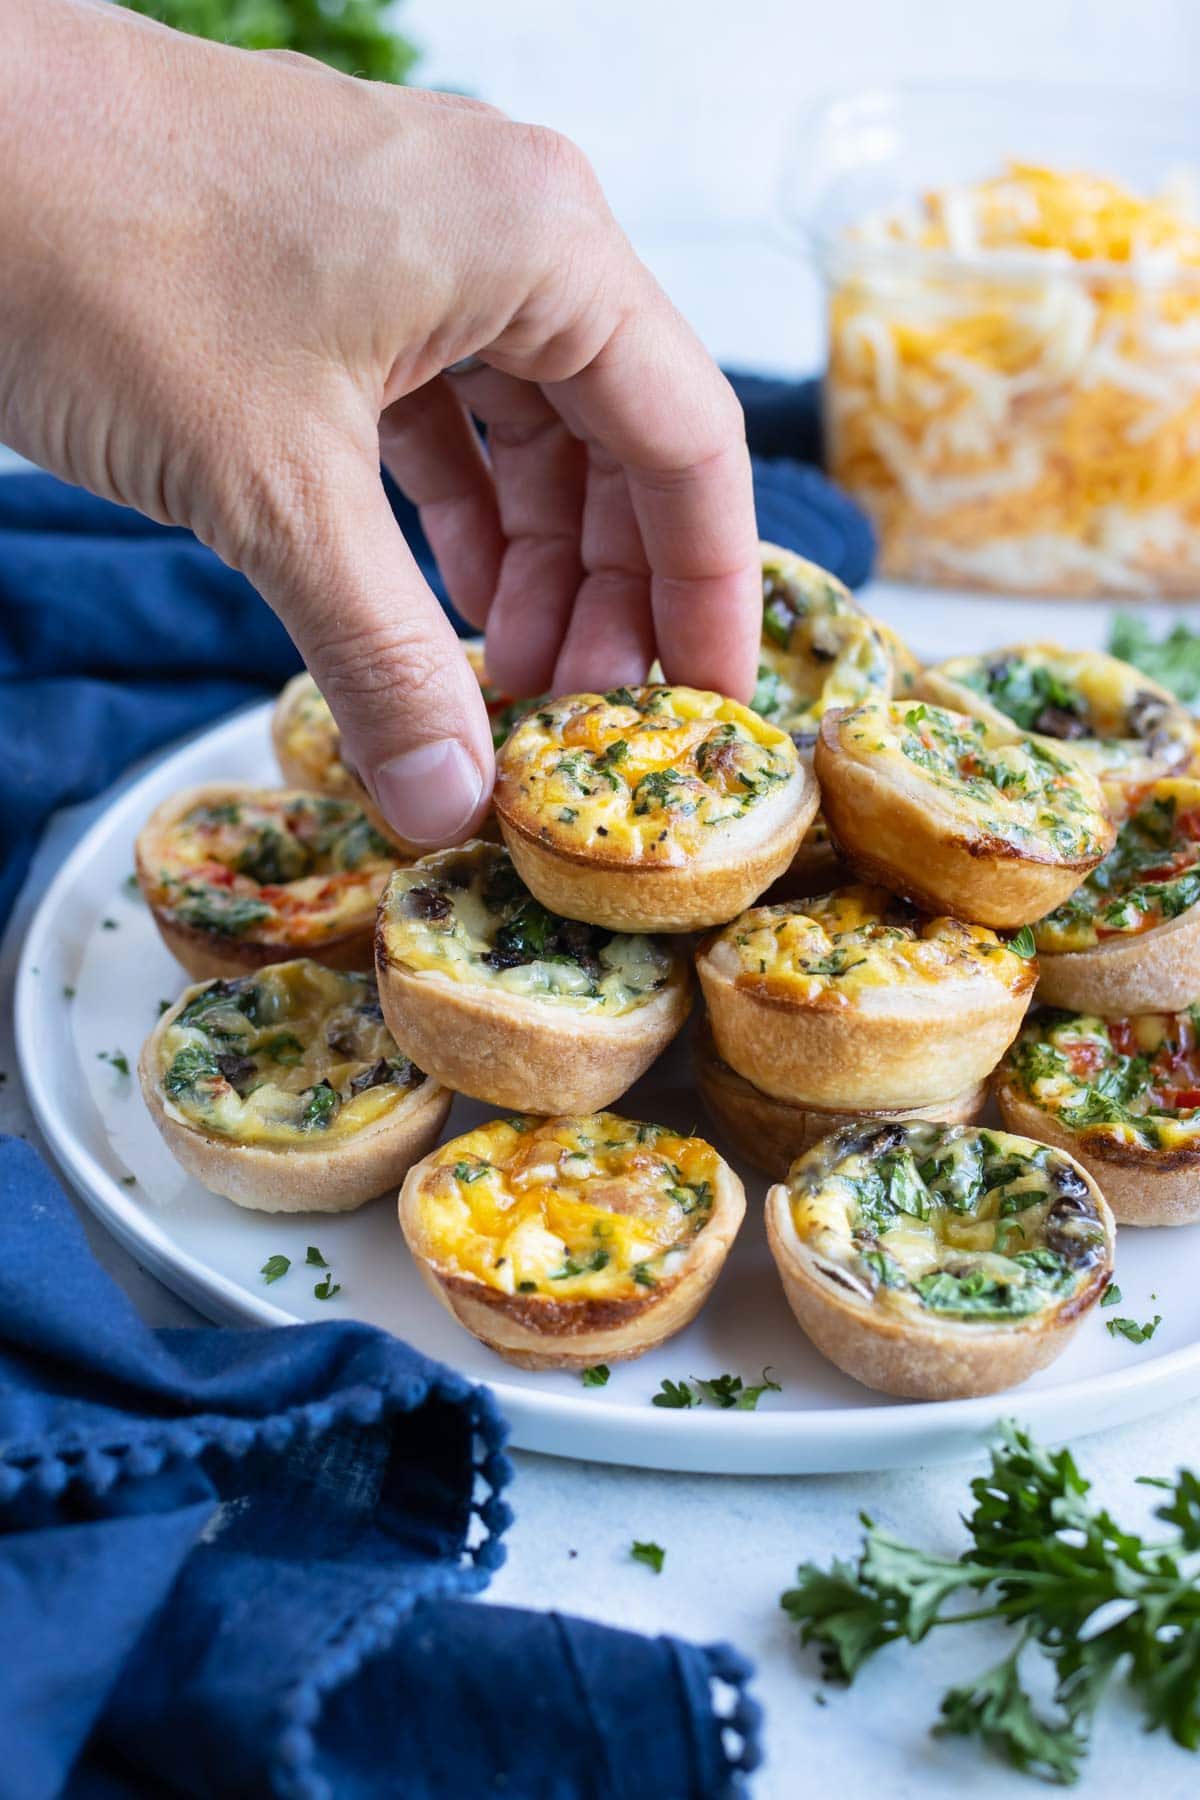 A mini quiche is picked up by a hand from a plate.